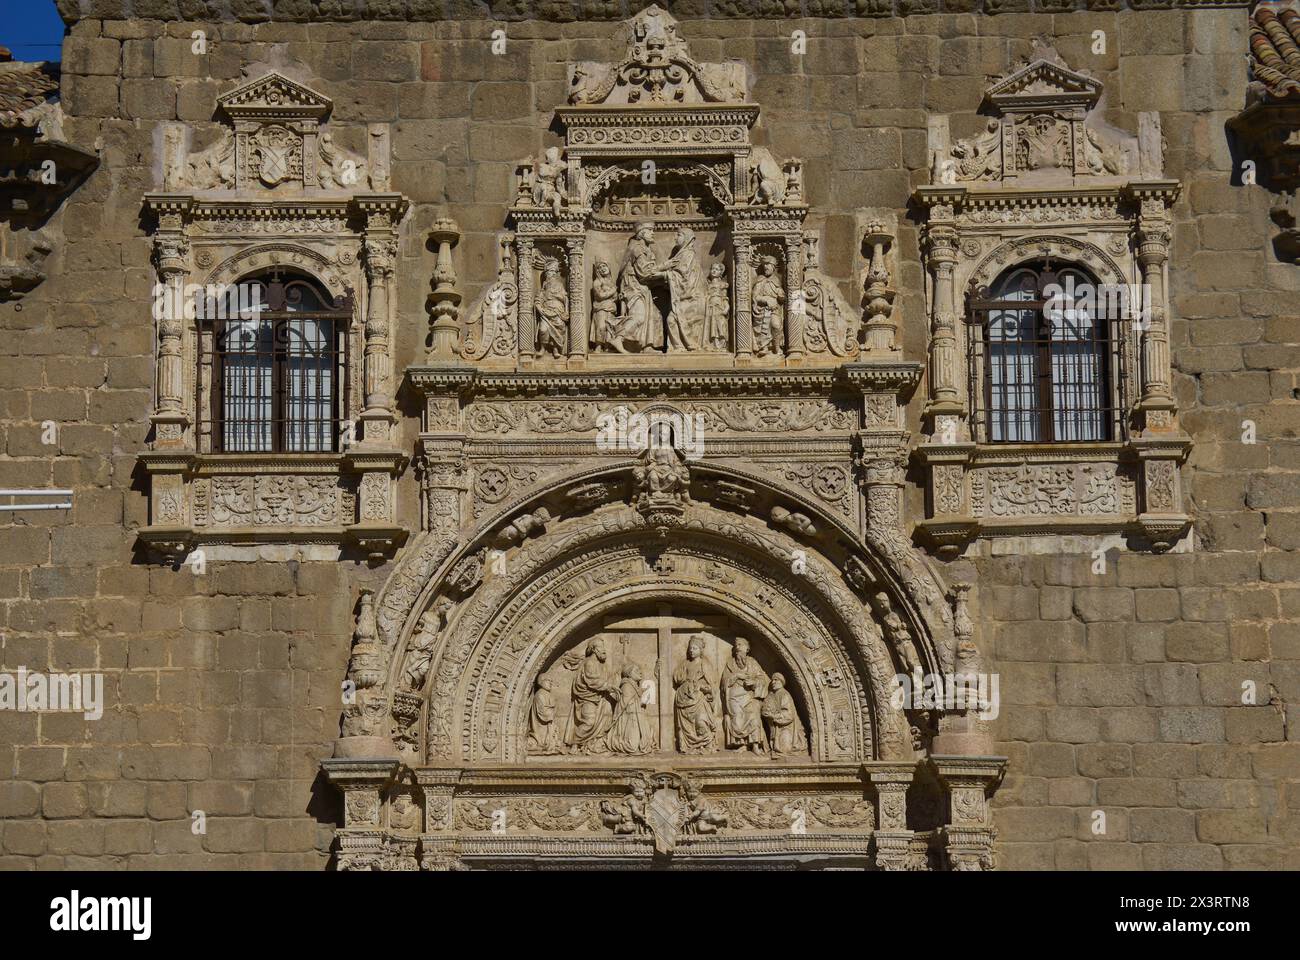 Toledo, Castile-La Mancha, Spain. Hospital de Santa Cruz. Founded by Cardinal Mendoza (1428-1495) at the end of the 15th century. View of the central part of the façade of the building, constructed in the Plateresque style in the 1520s, by Alonso de Covarrubias (1488-1570). In the tympanum, the Adoration of the Cross by St. Helena, St. Peter and St. Paul. In the central niche, above the tympanum, the embrace of St. Joachim and St. Anne at the Golden Gate of Jerusalem. The building houses the Museum of Santa Cruz. Author: Alonso de Covarrubias (1488-1570). Spanish architect. Stock Photo